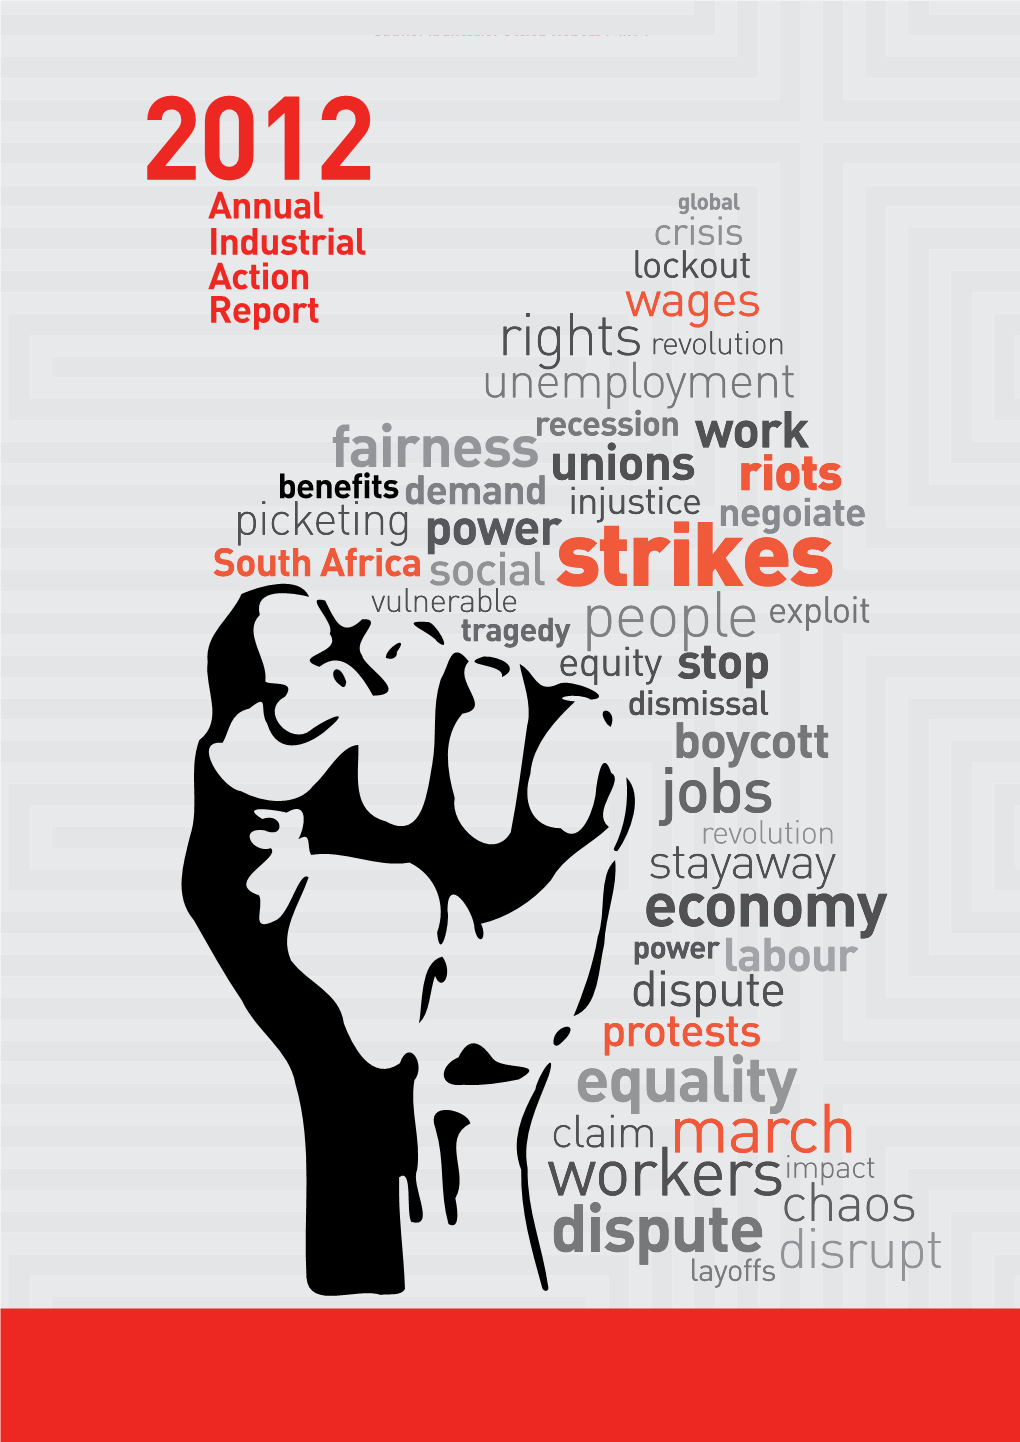 2012 Annual Industrial Action Report